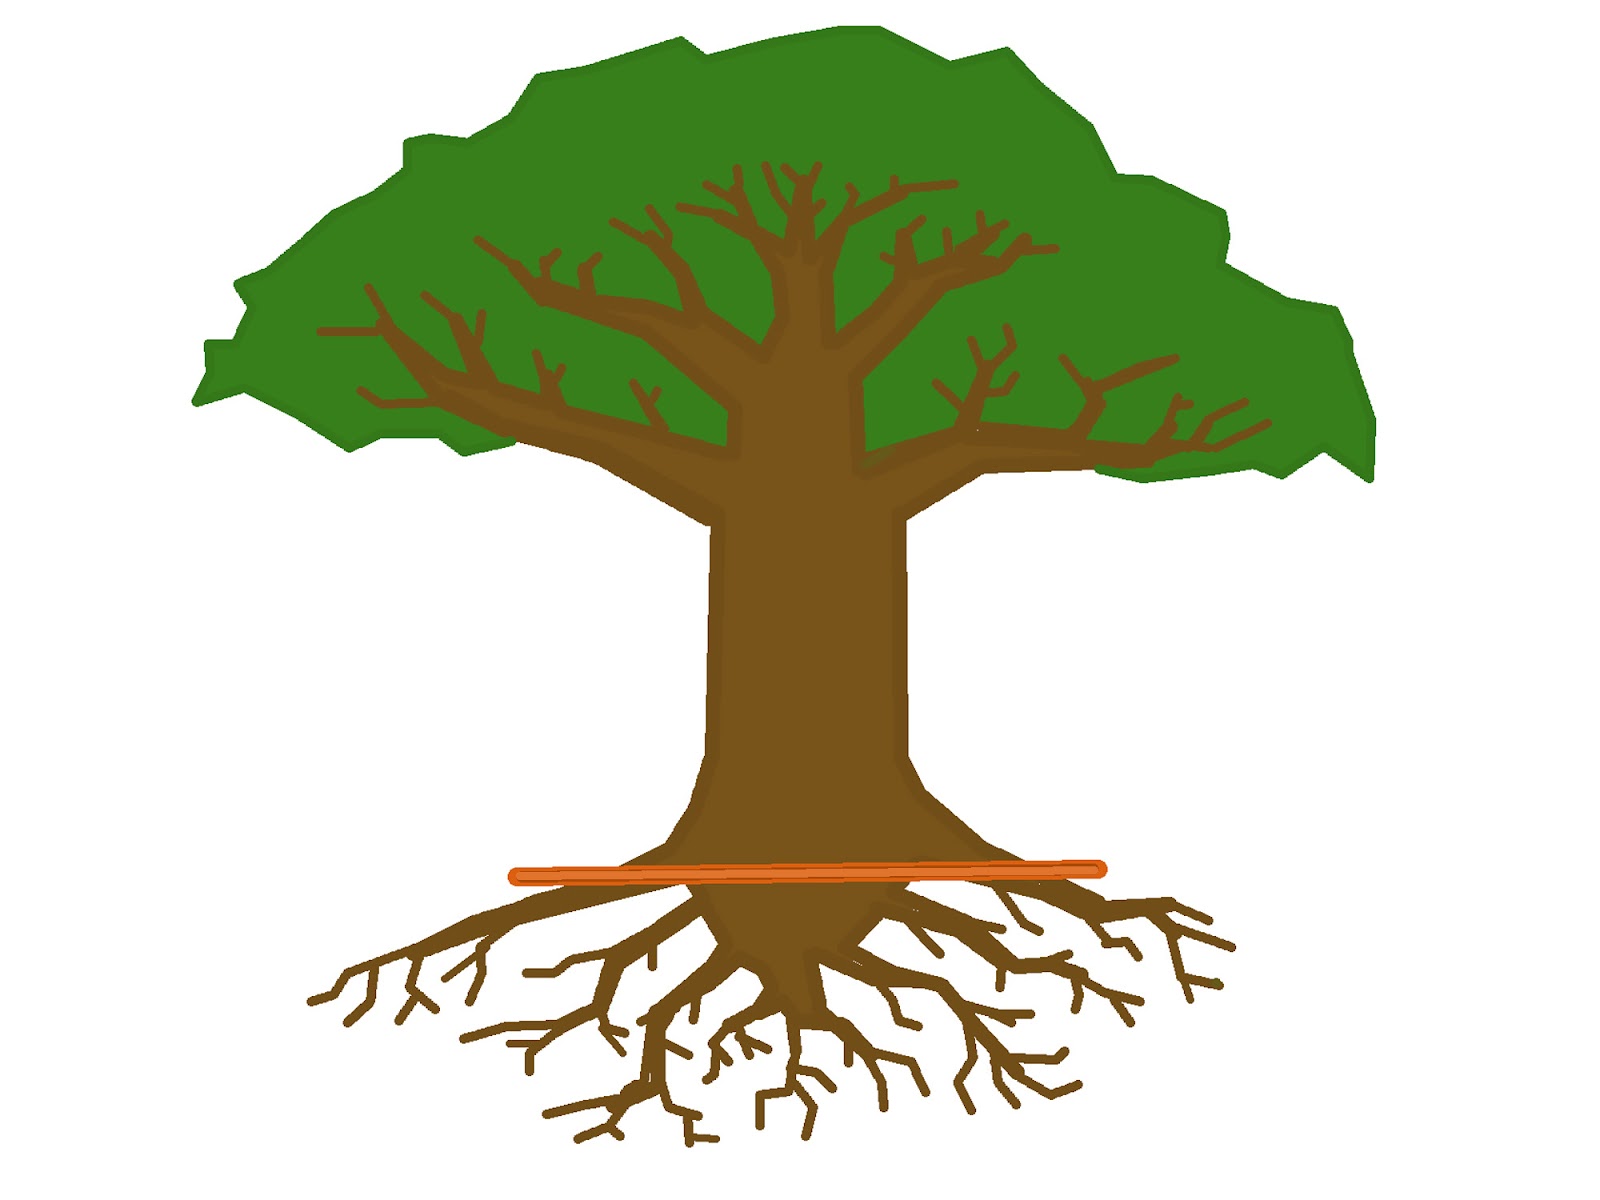 Free Tree Roots Cliparts, Download Free Clip Art, Free Clip.